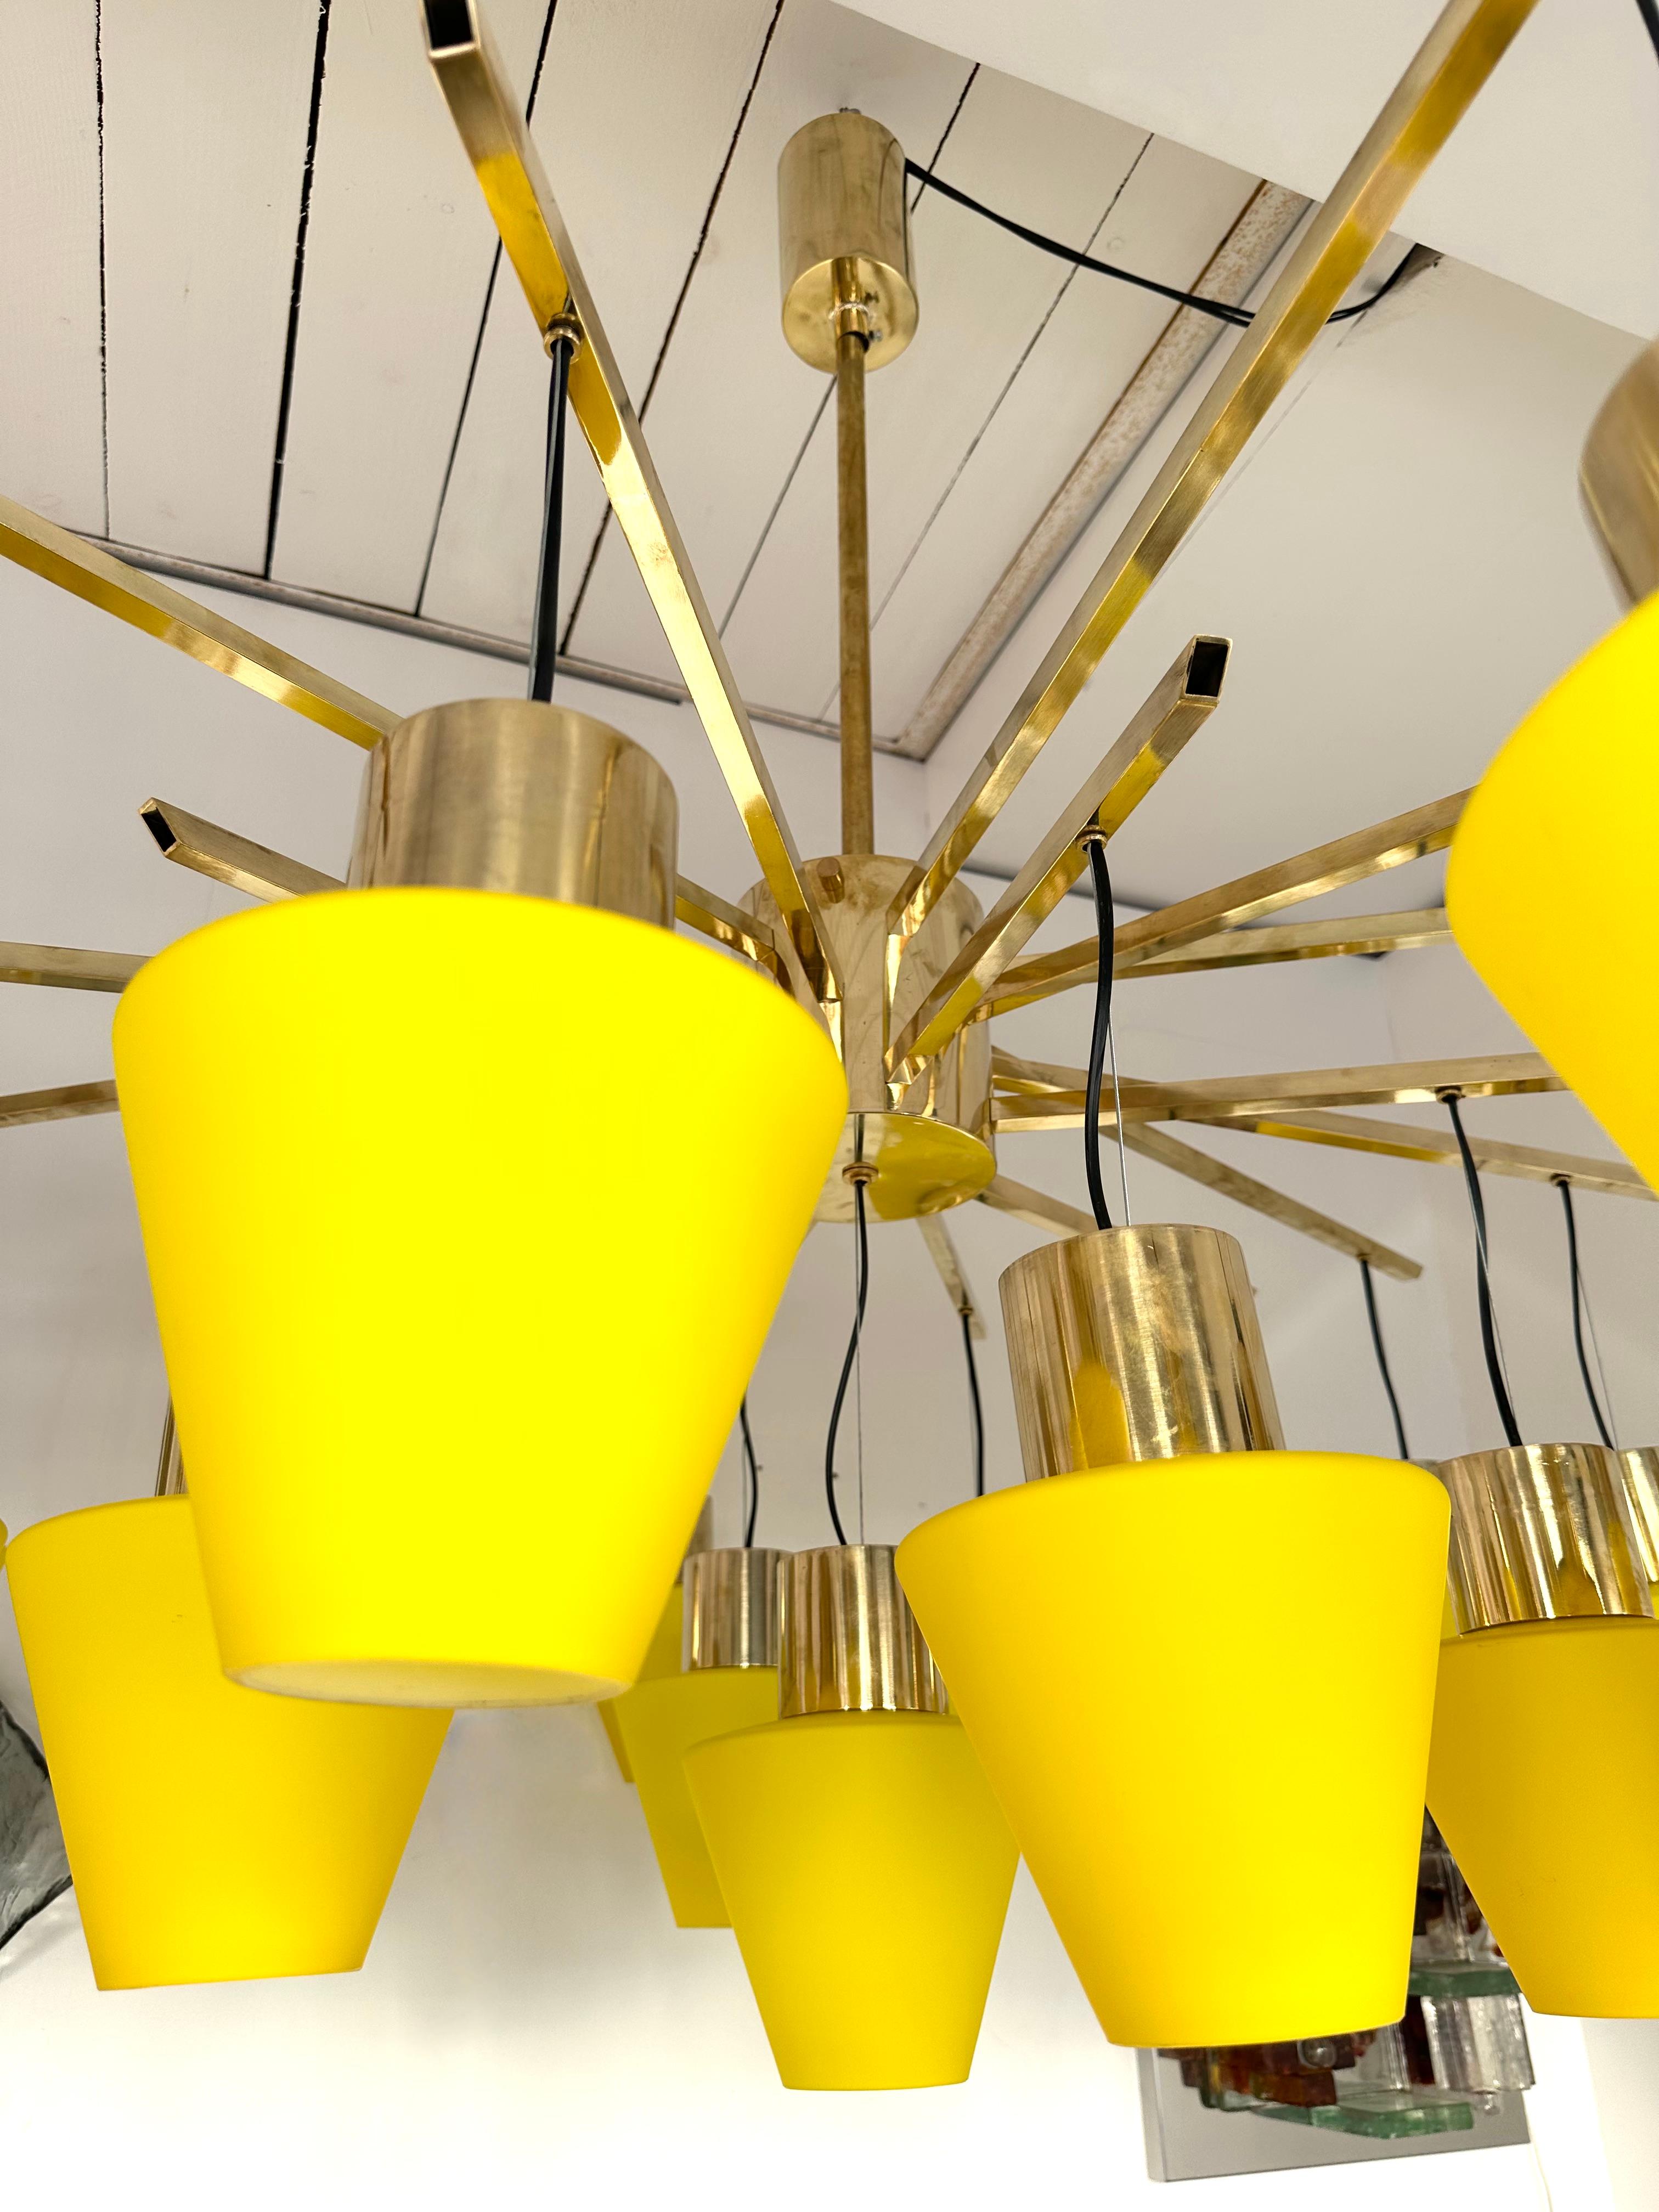 Large brass chandelier ceiling pendant light lamp with large Yellow Murano glass cup. Made with old stock of glass from the manufacture Vistosi. High quality glass. Contemporary work from a small italian artisanal workshop. In the mood of